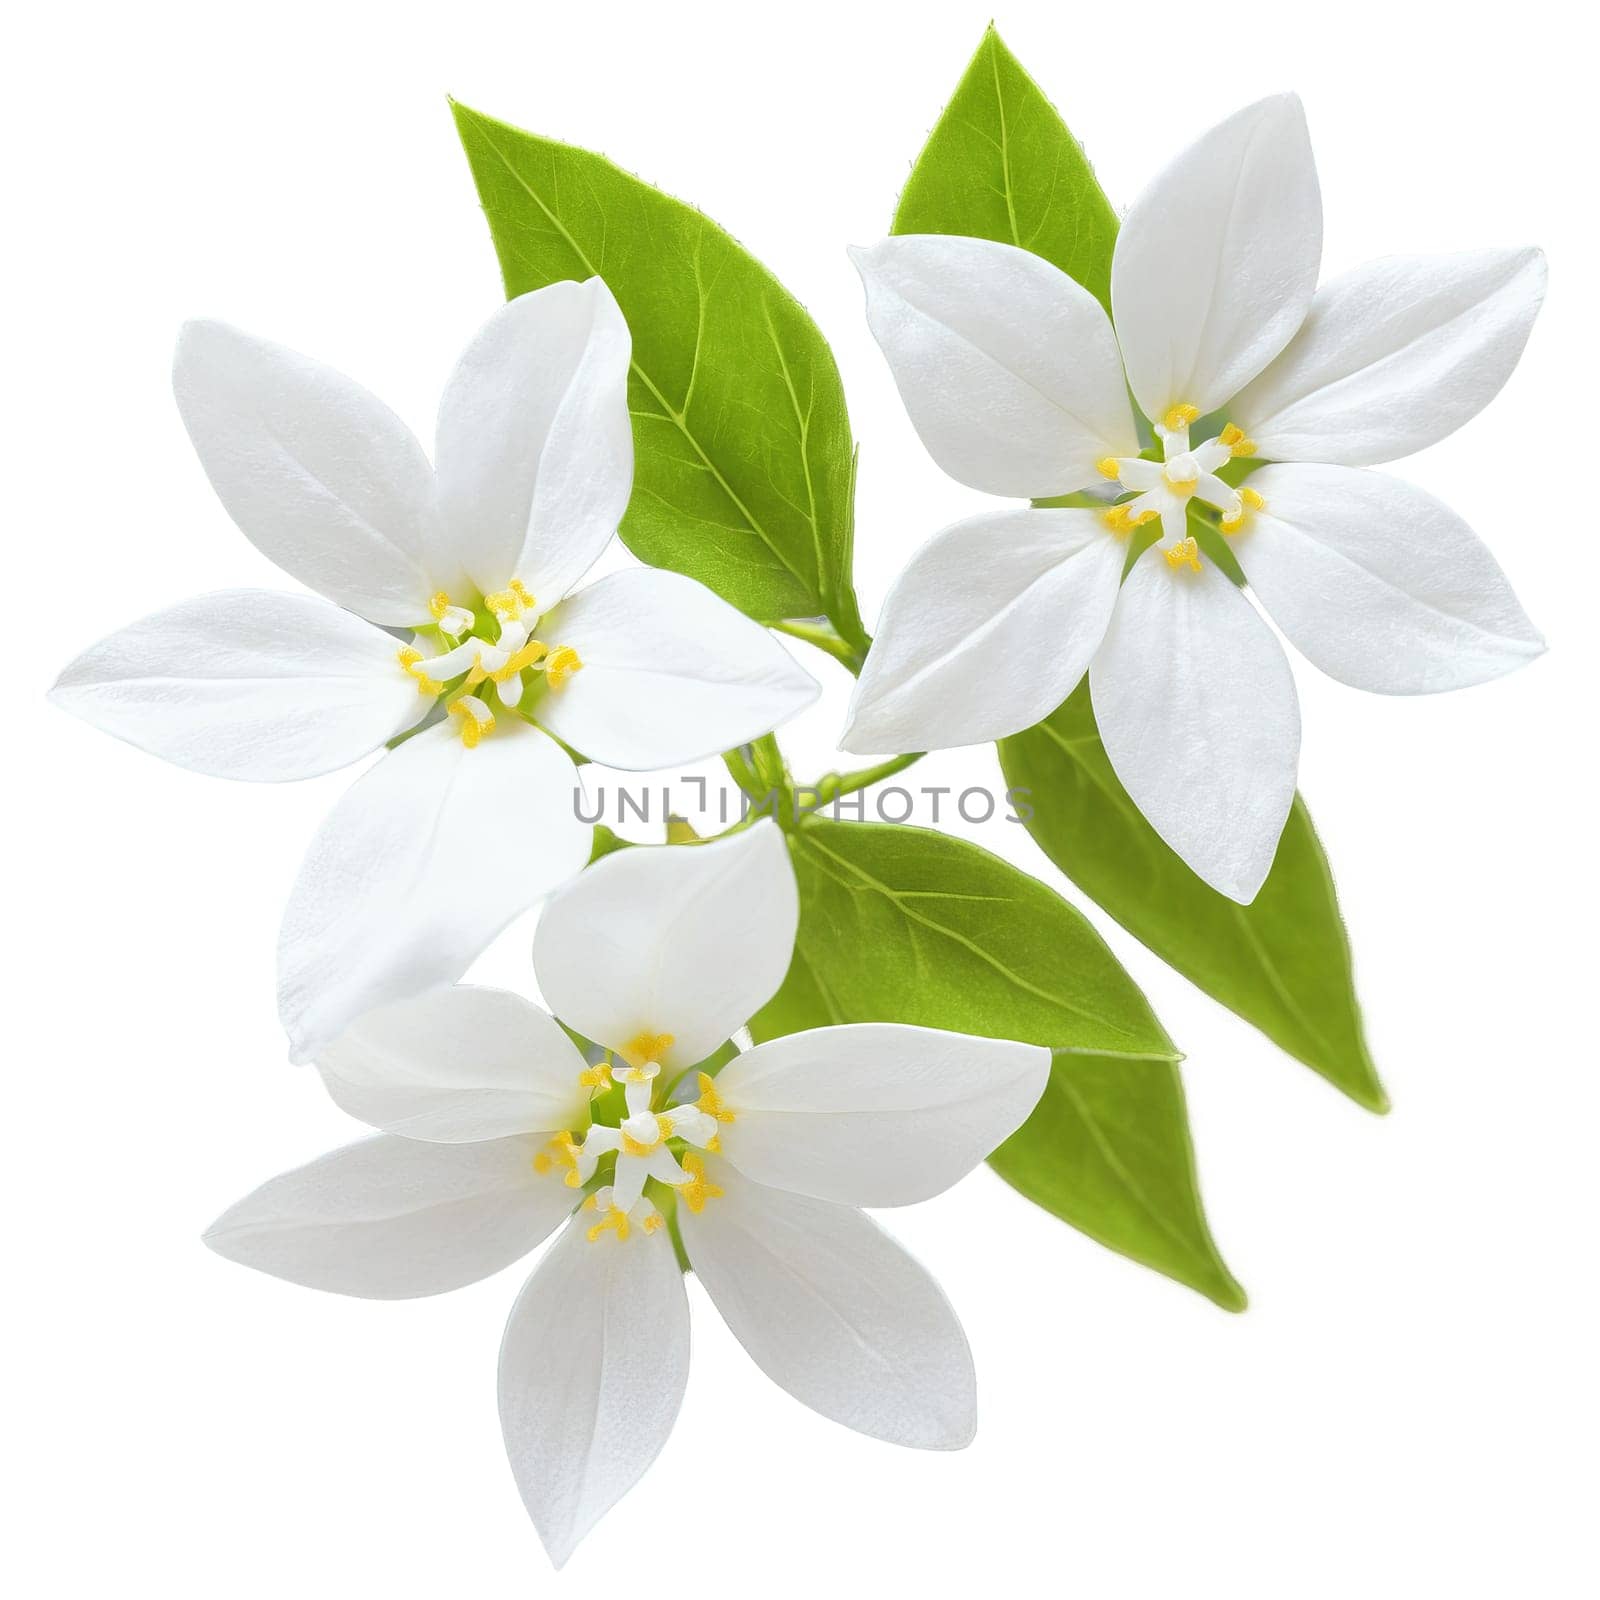 White jasmine small star shaped flowers in clusters delicate and fragrant Jasminum polyanthum by Matiunina